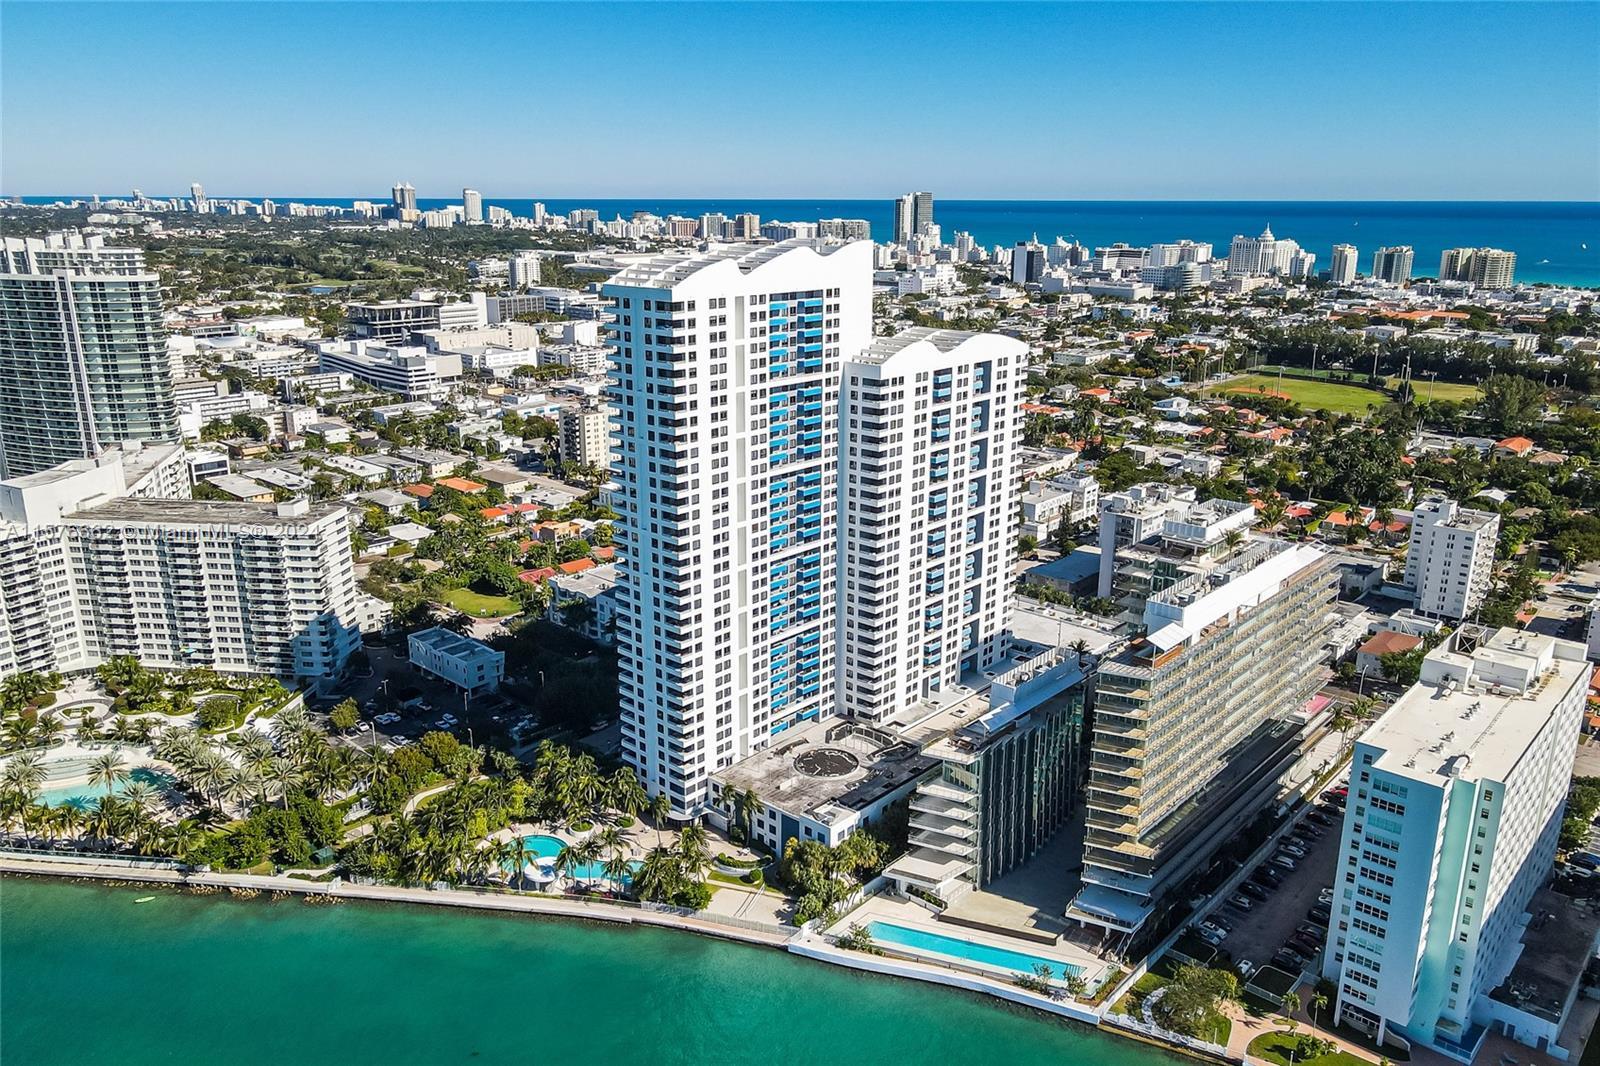 Newly renovated, at one of Miami Beach's most amenity rich, full-service condos. Waverly 2112 has be